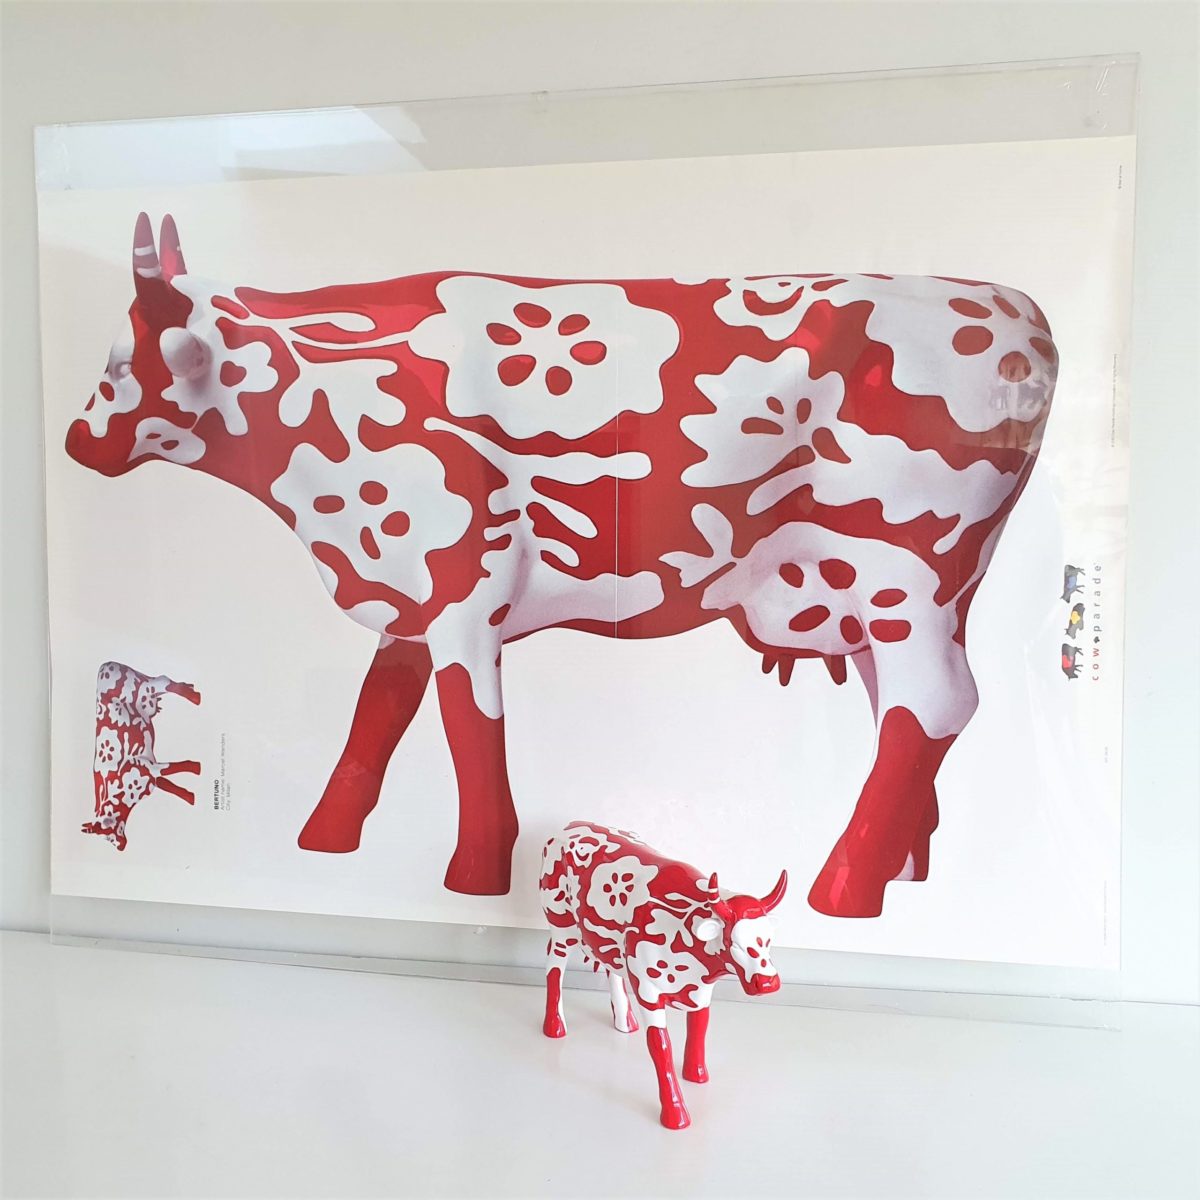 Marcel Wanders Cow Parade (sticker) Poster